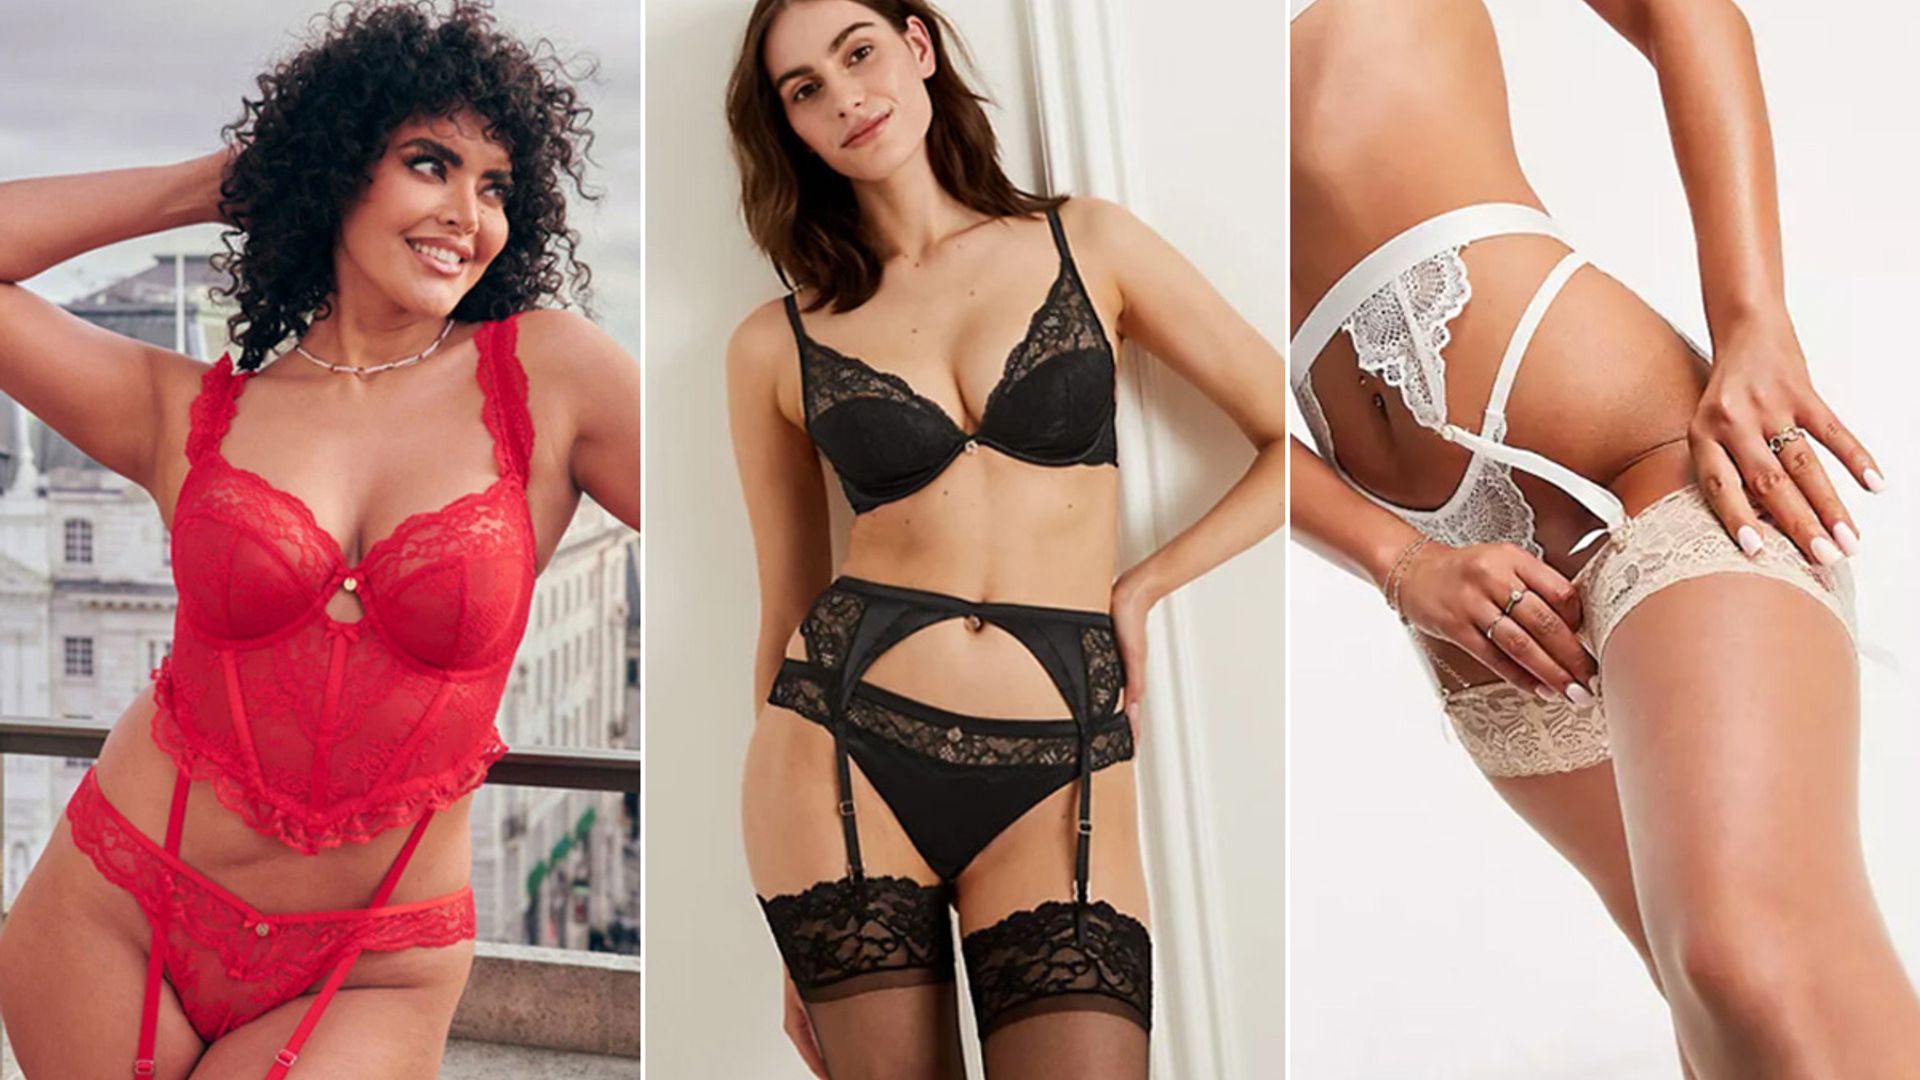 The Best Lingerie Advice From The Experts